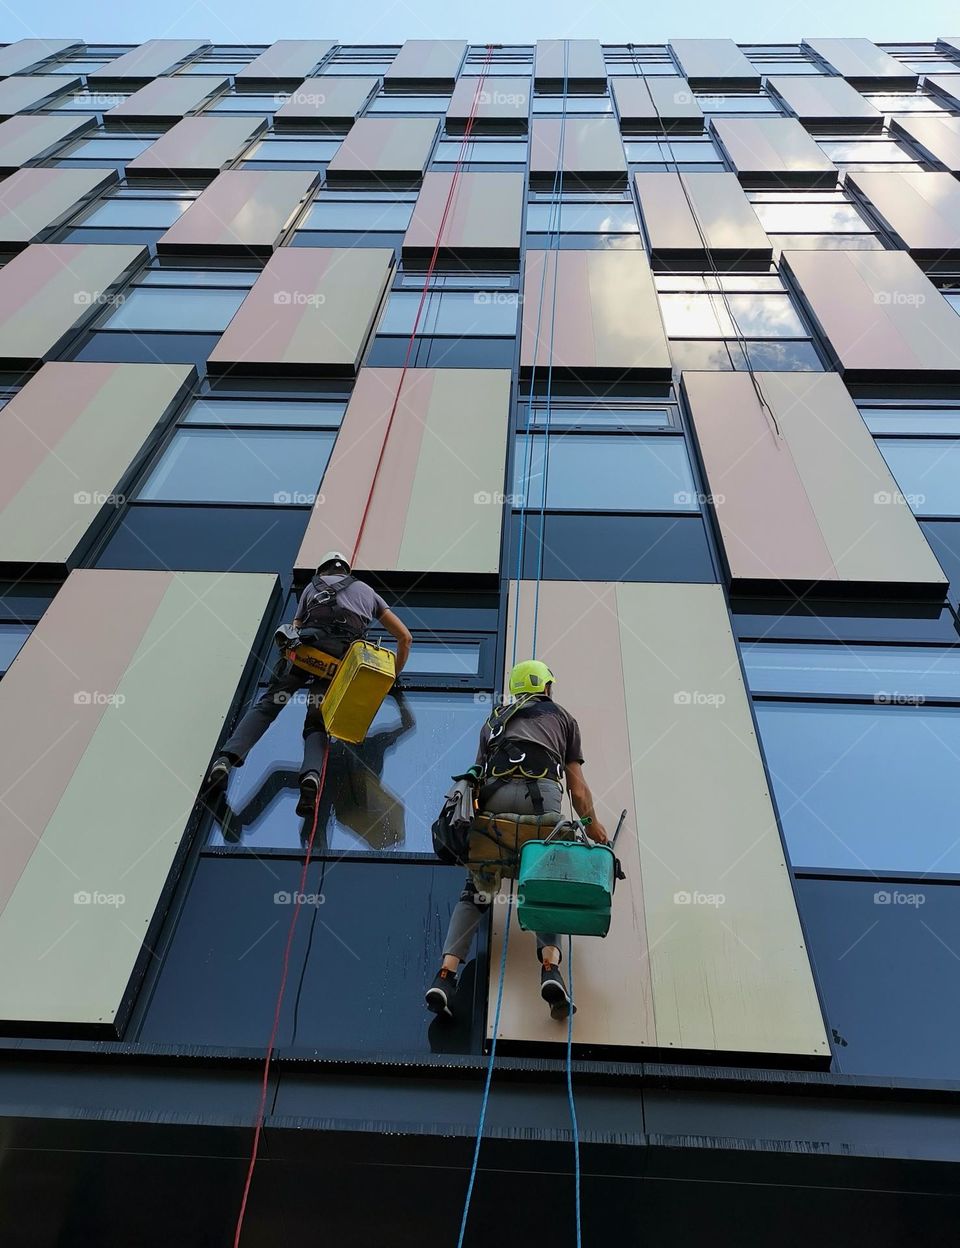 From the ground up. Windows cleaners clean windows in a multi-storey building.